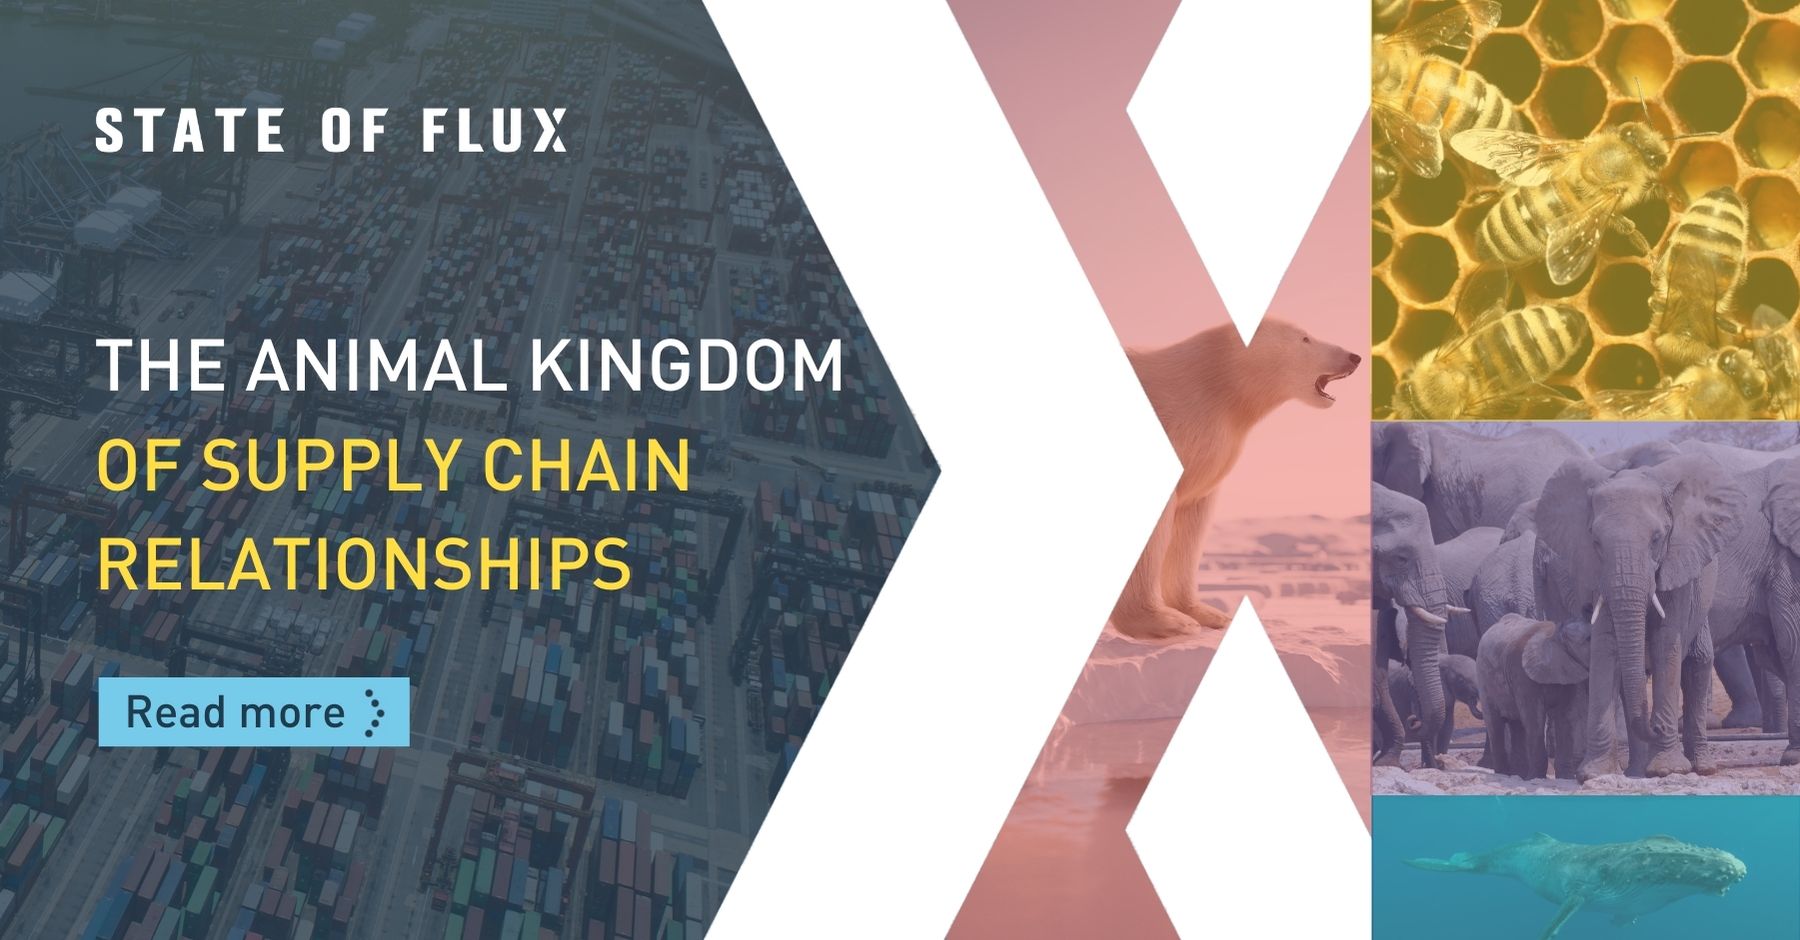 The Animal Kingdom of Supply Chain Relationships